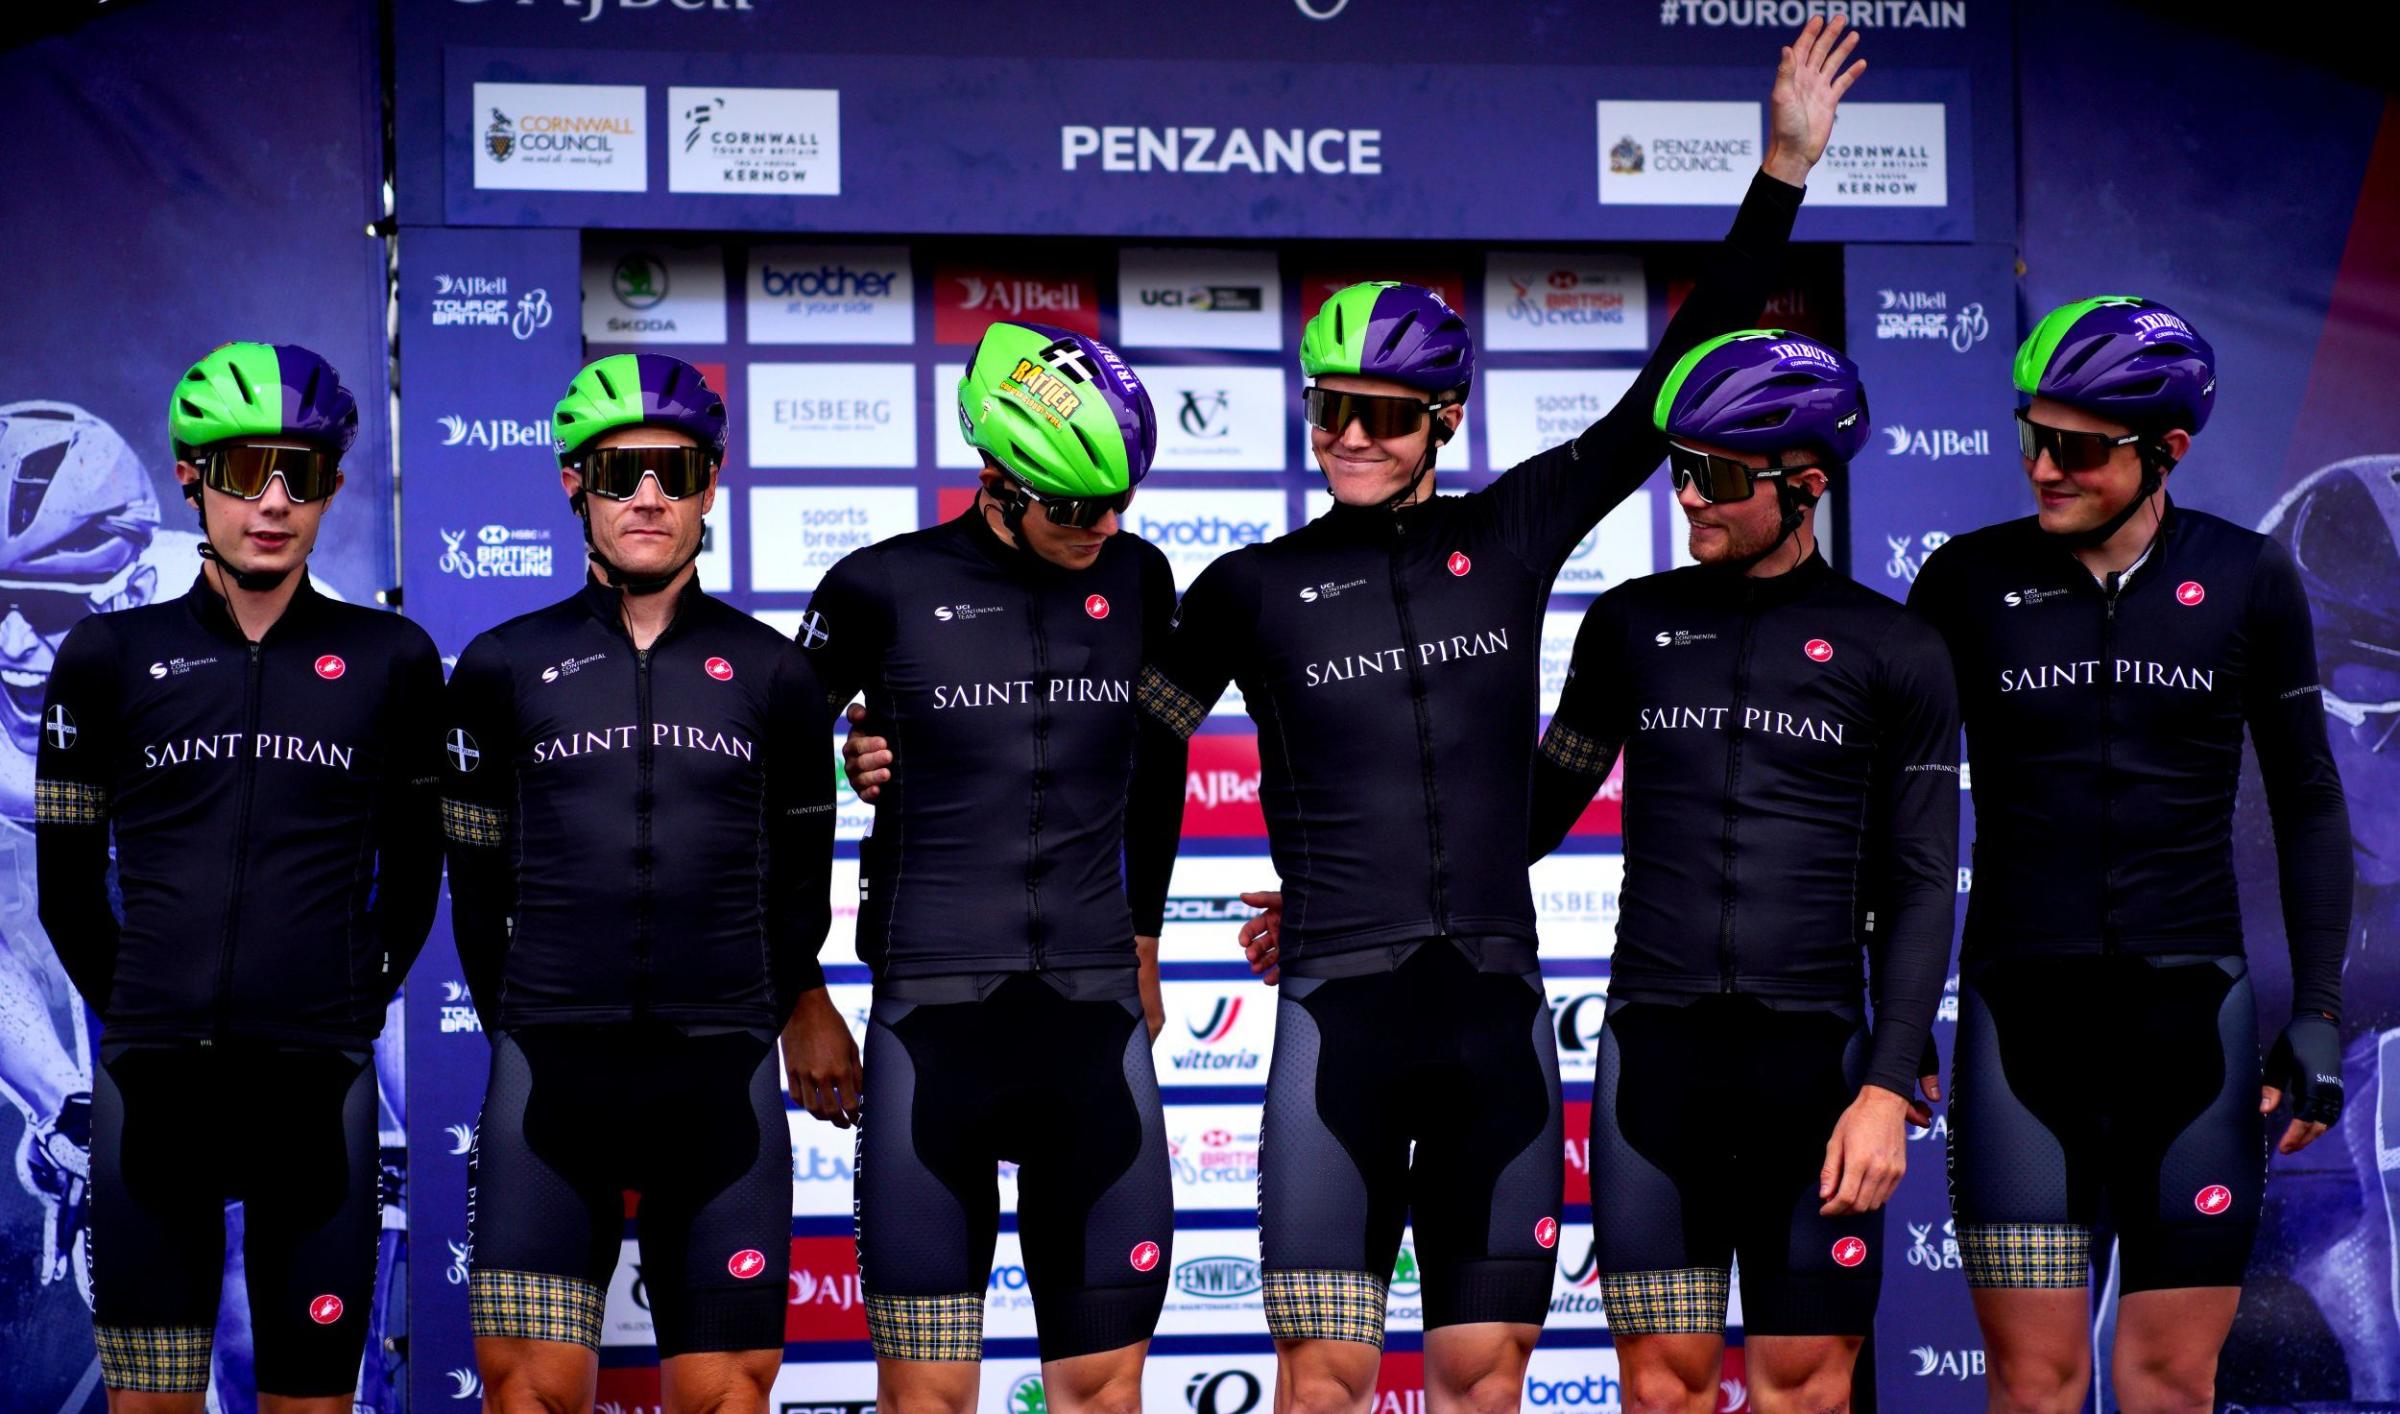 The Saint Piran national team pose on stage prior to the start Picture: Ben Birchall/PA Wire